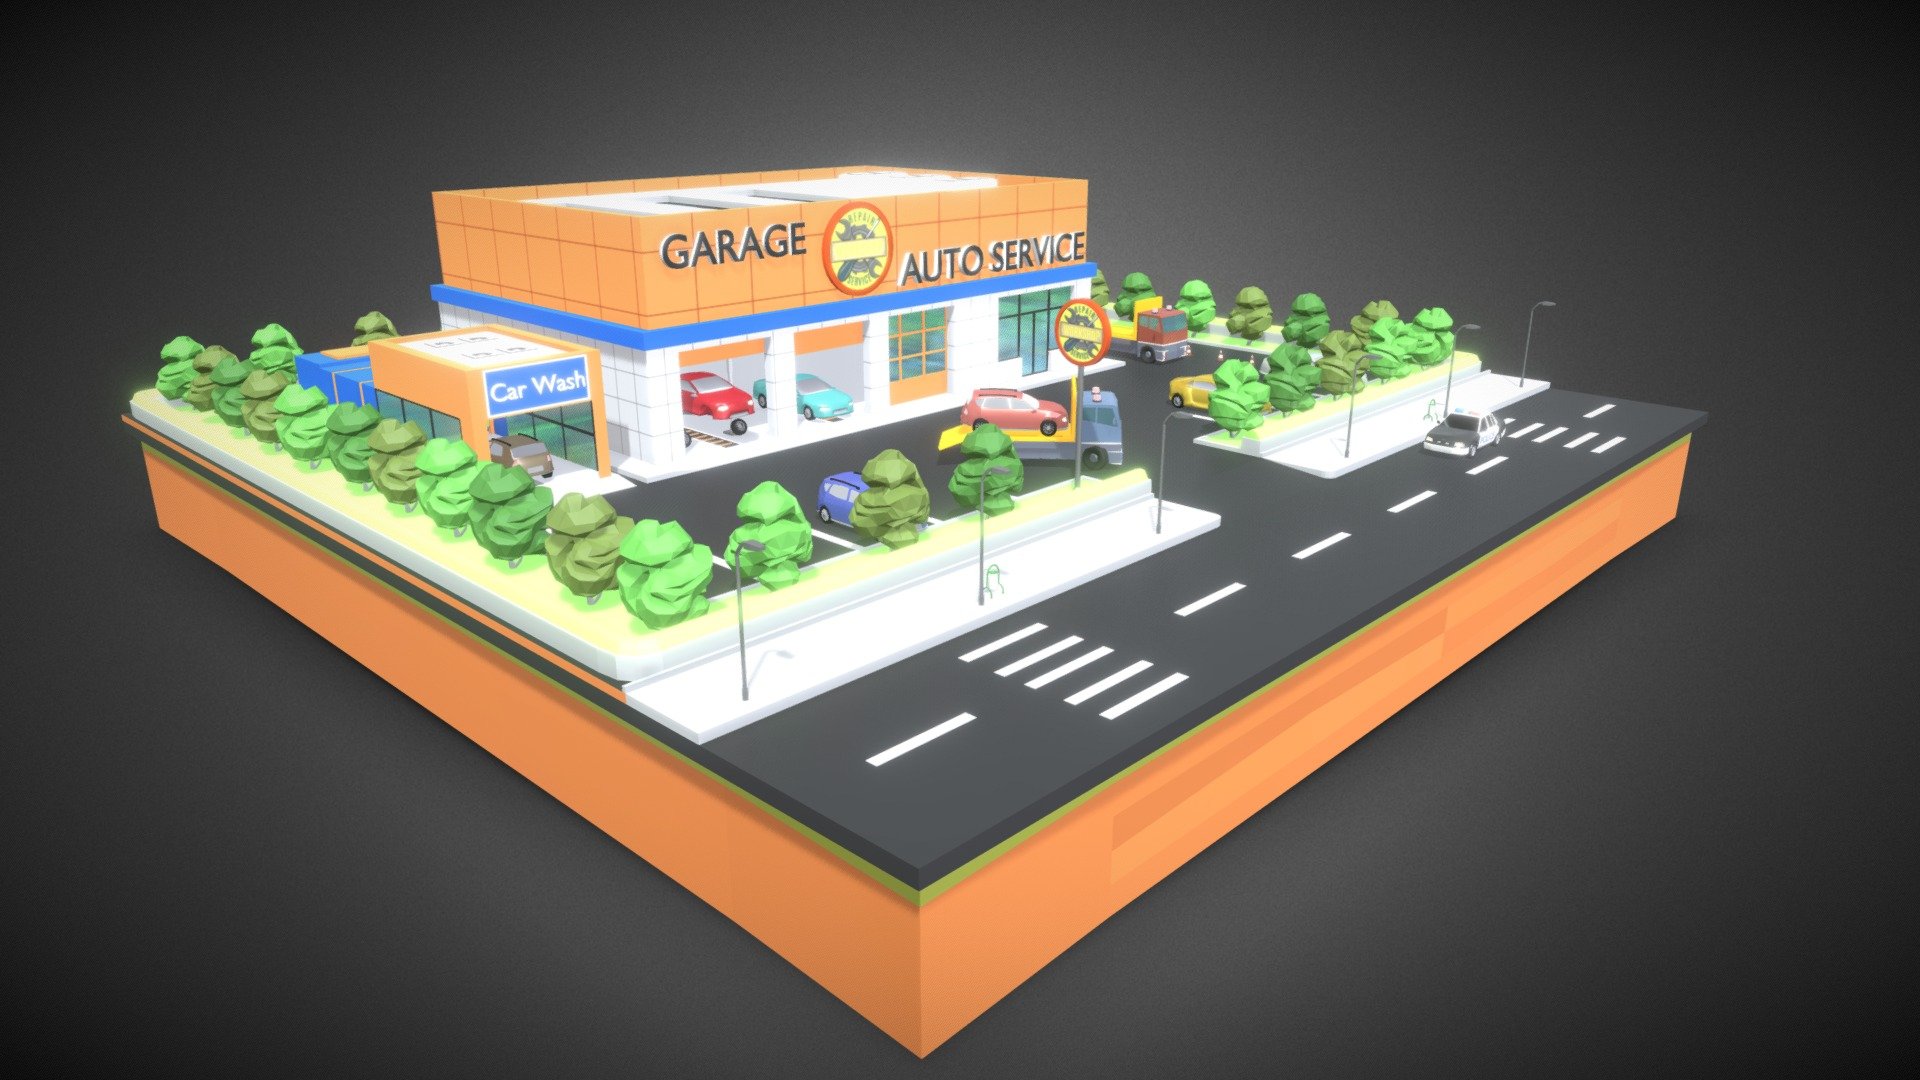 Low poly Auto service and car wash building with car and truck
 I'm selling this model( but my country banned paypal(LOL!) So I can't put this product on sketchfab for sale :(

My cgtrader link
https://bit.ly/3e2pCci - Low poly Auto Service - 3D model by Eymen Güler (@eymenguler) 3d model